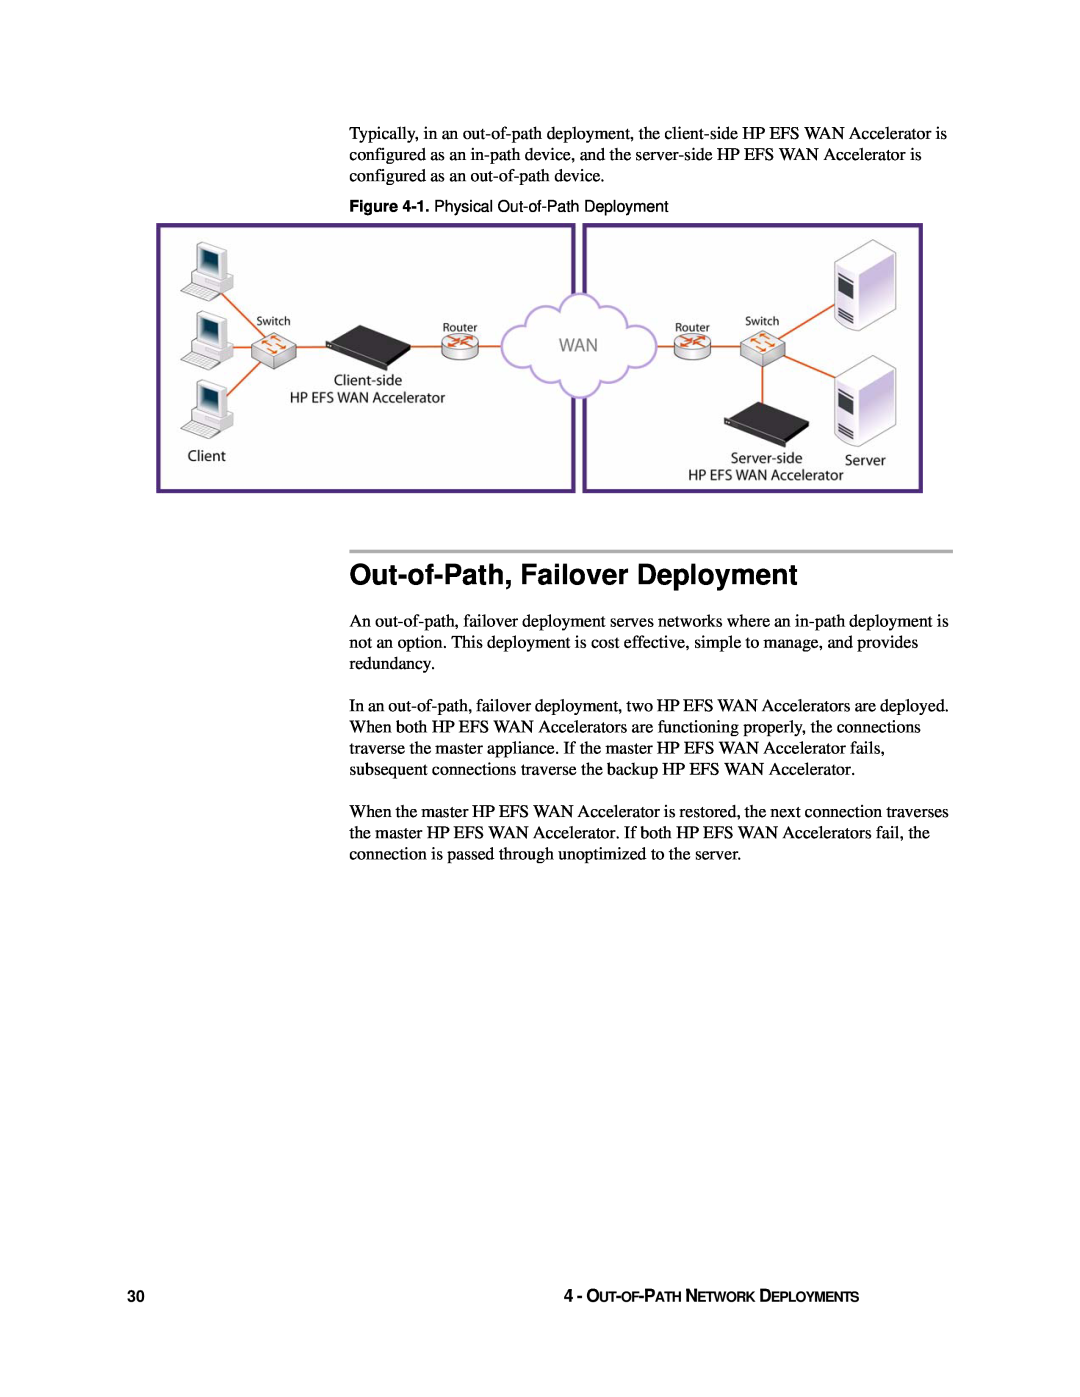 HP Enterprise File Services WAN Accelerator manual Out-of-Path, Failover Deployment, 1. Physical Out-of-Path Deployment 